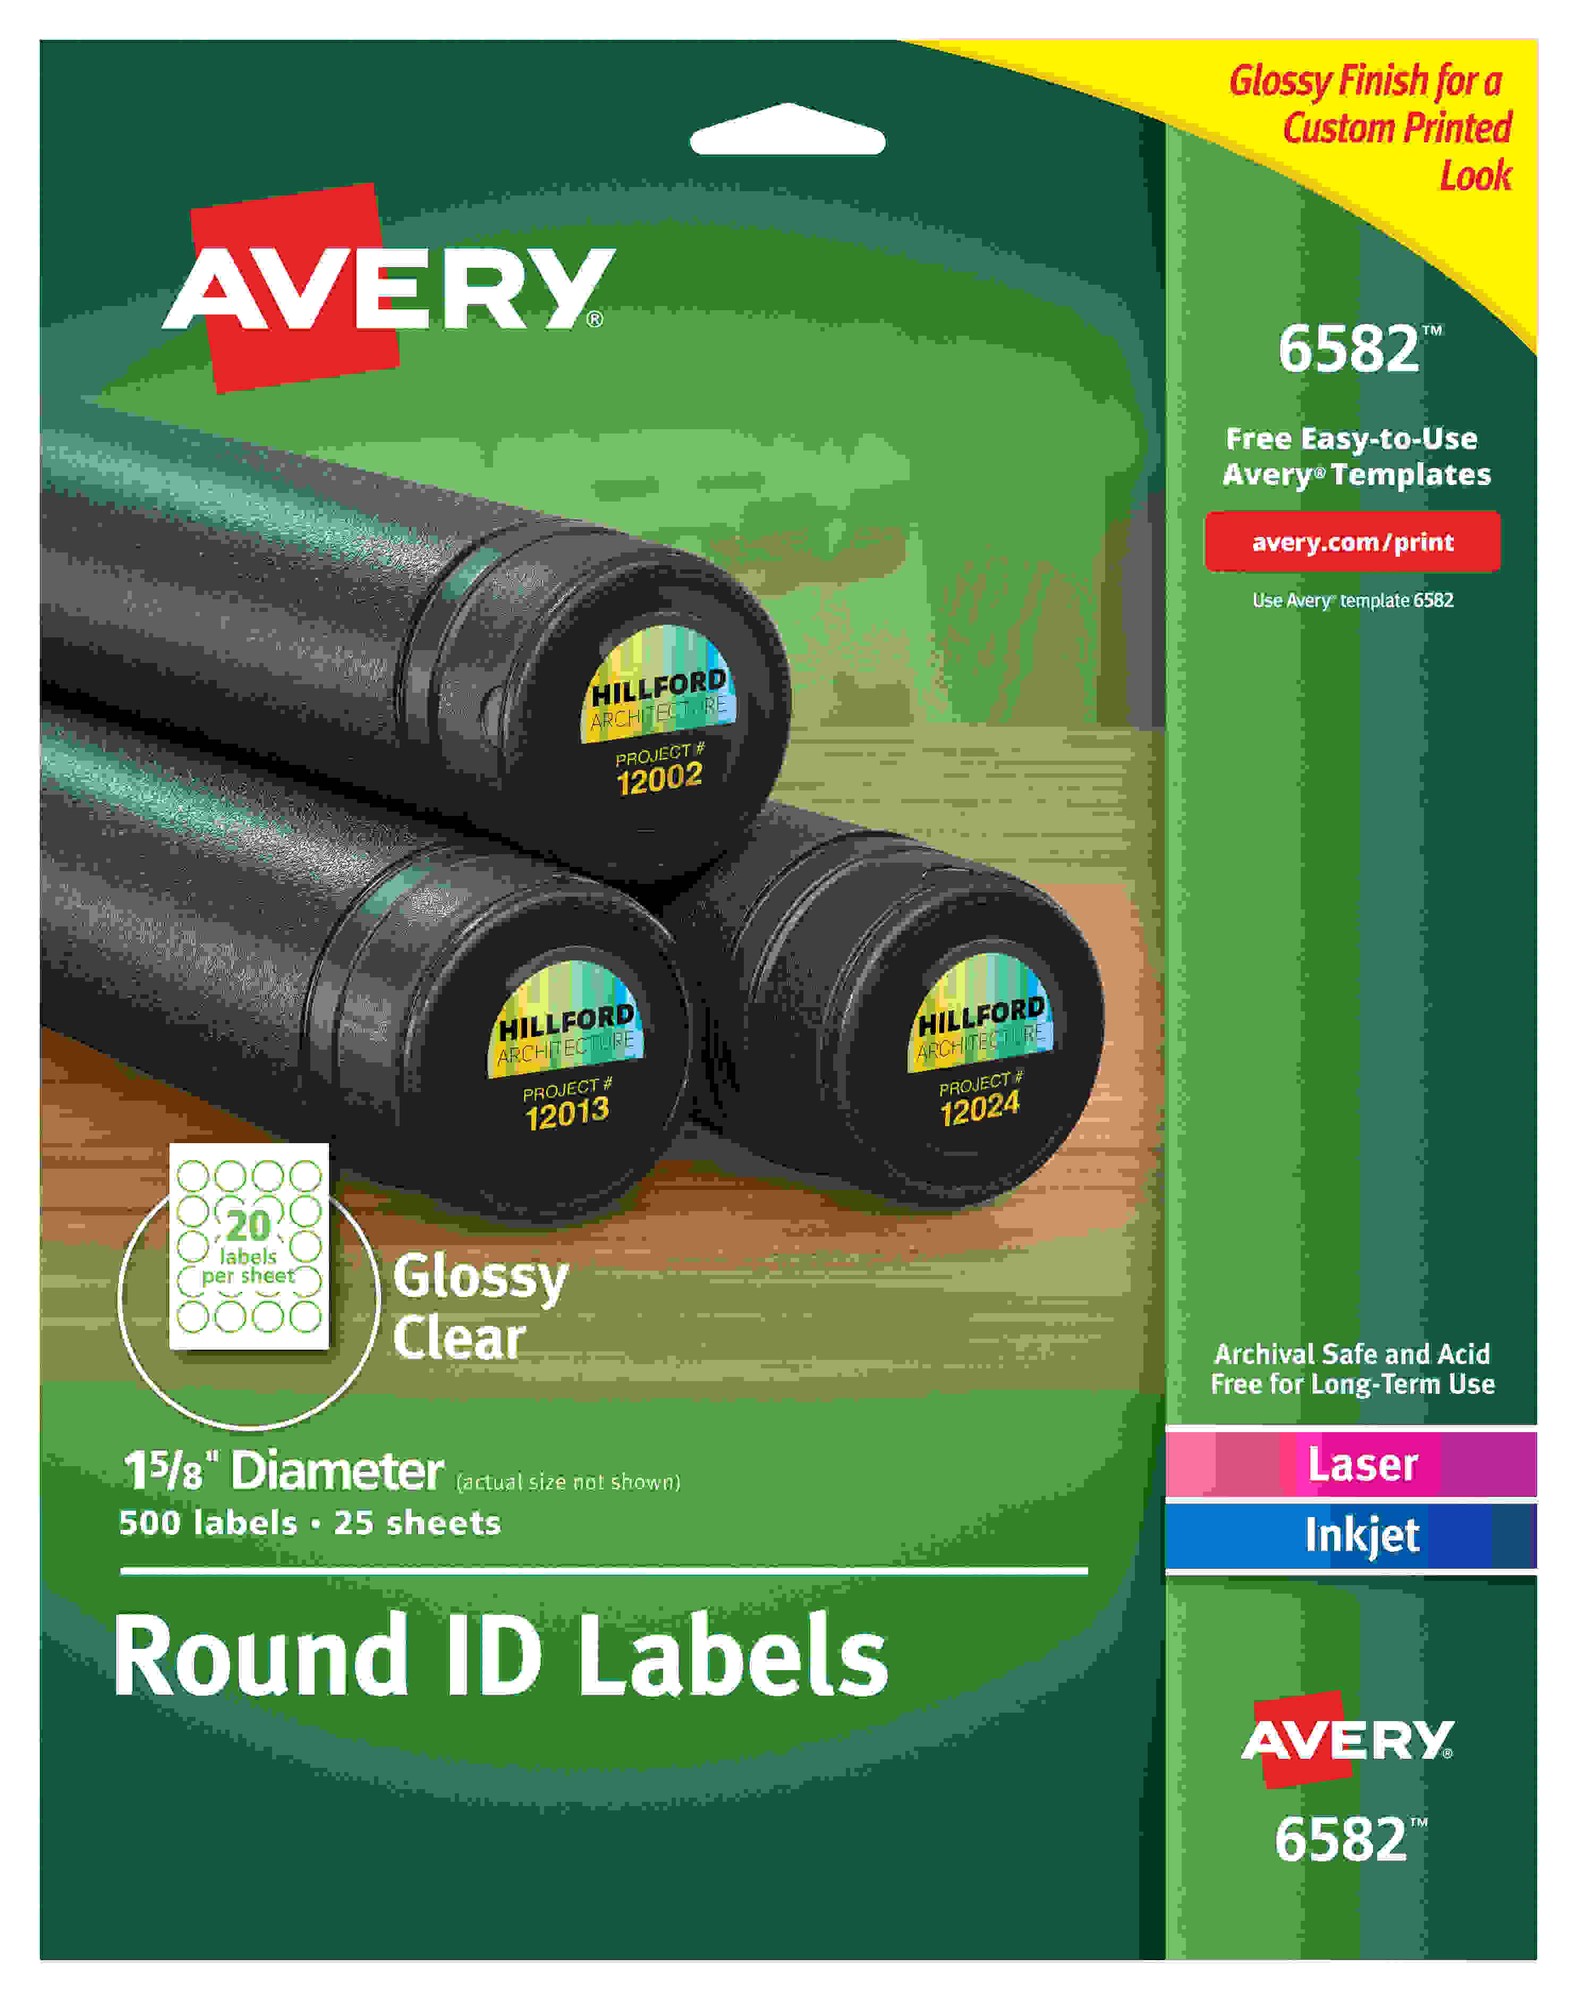 Avery Glossy Permanent Multipurpose Round Labels - 1 5/8" Diameter - Permanent Adhesive - Round - Laser, Inkjet - Clear - F